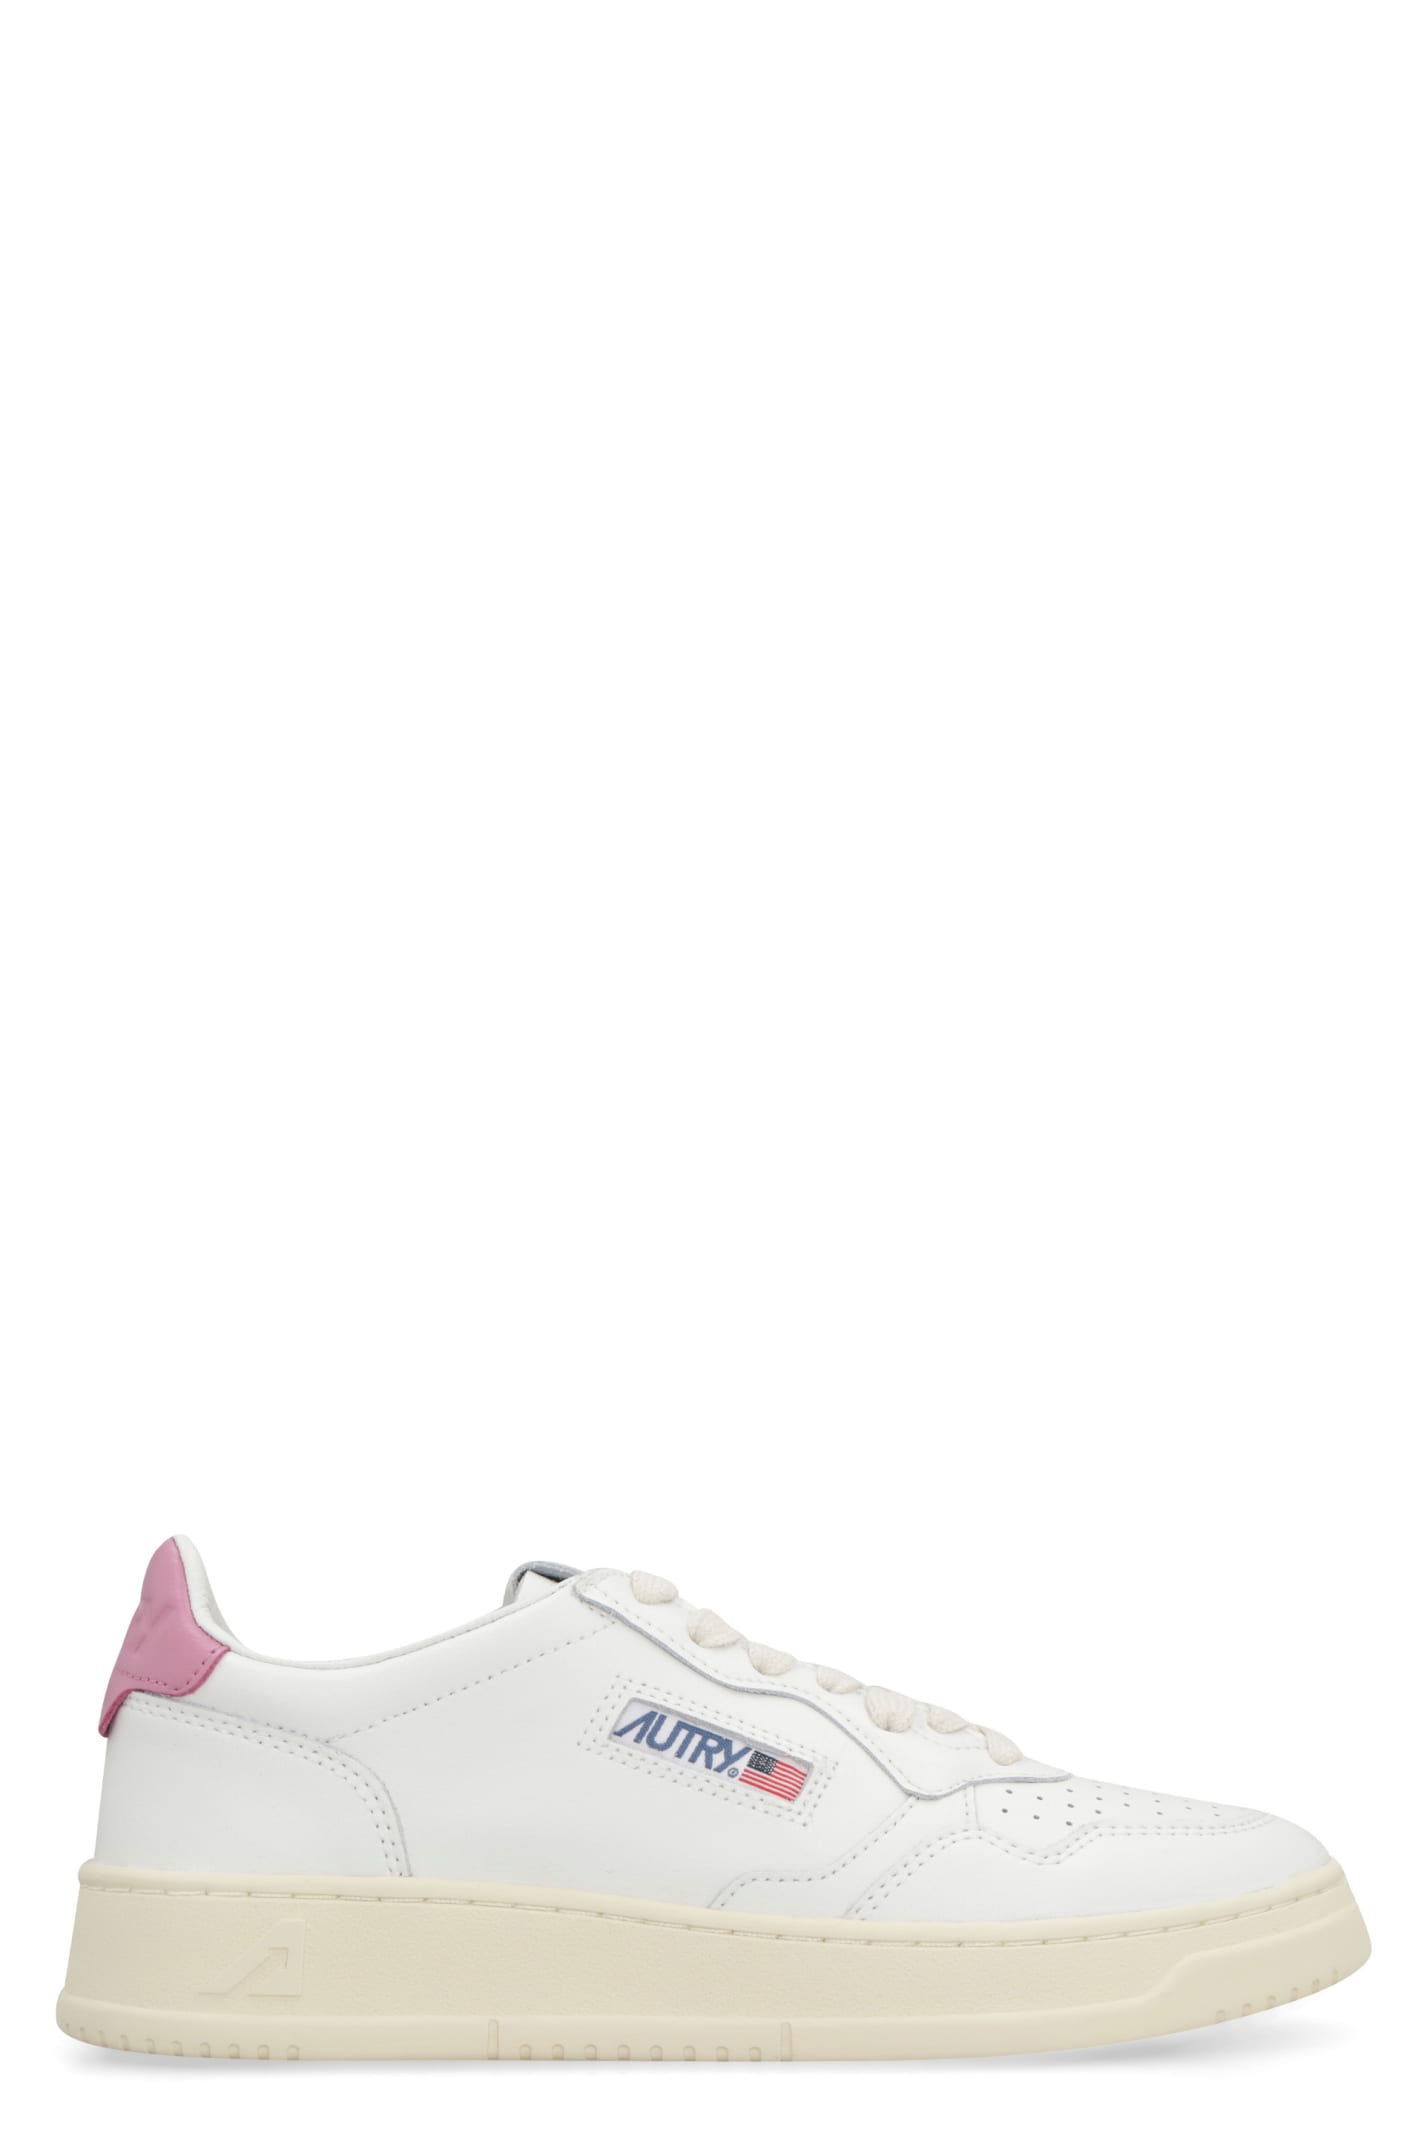 Shop Autry Medalist Leather Low-top Sneakers Sneakers In Wht/mauve